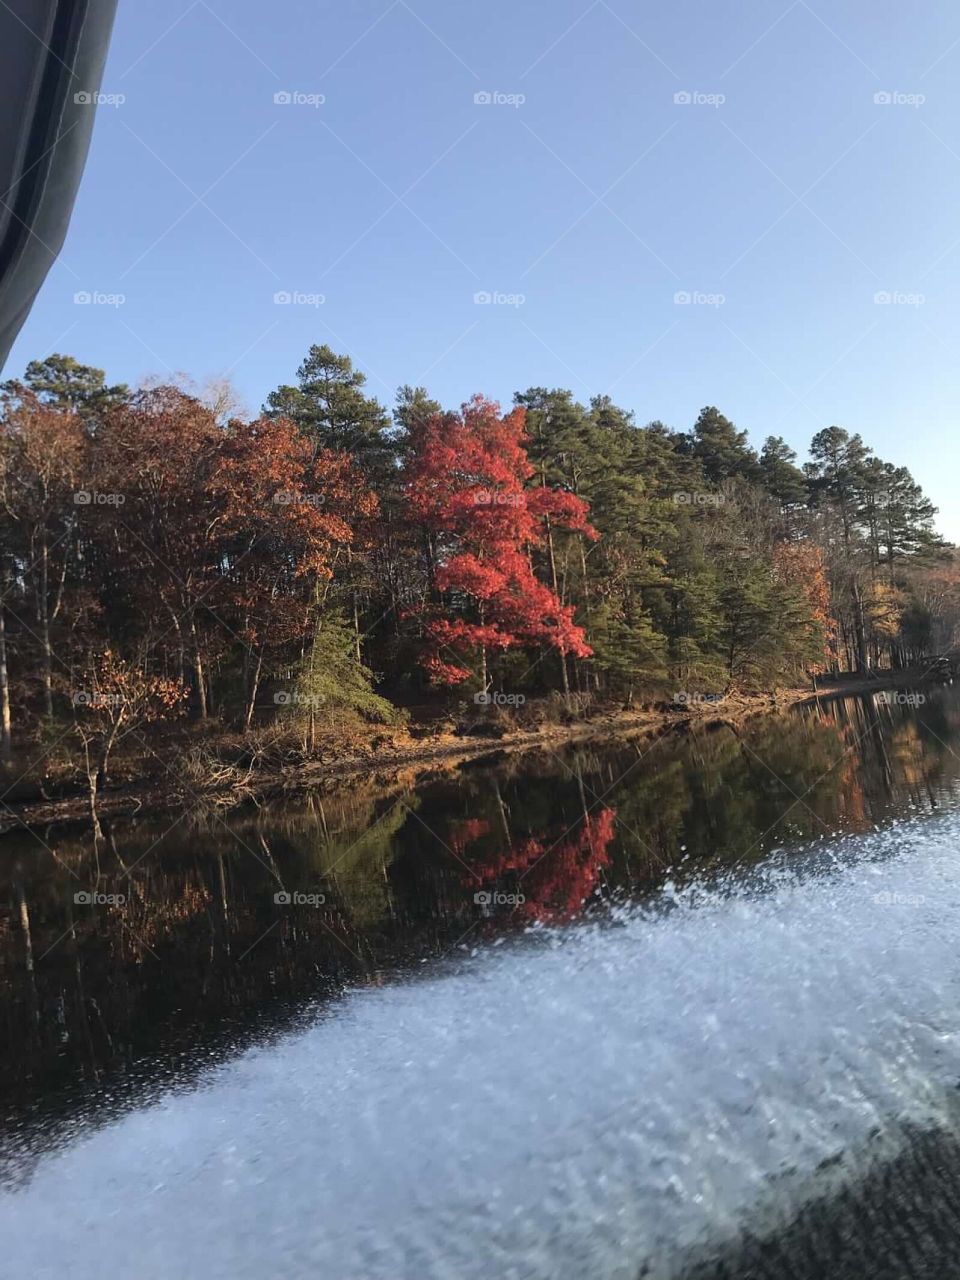 River in the Fall 